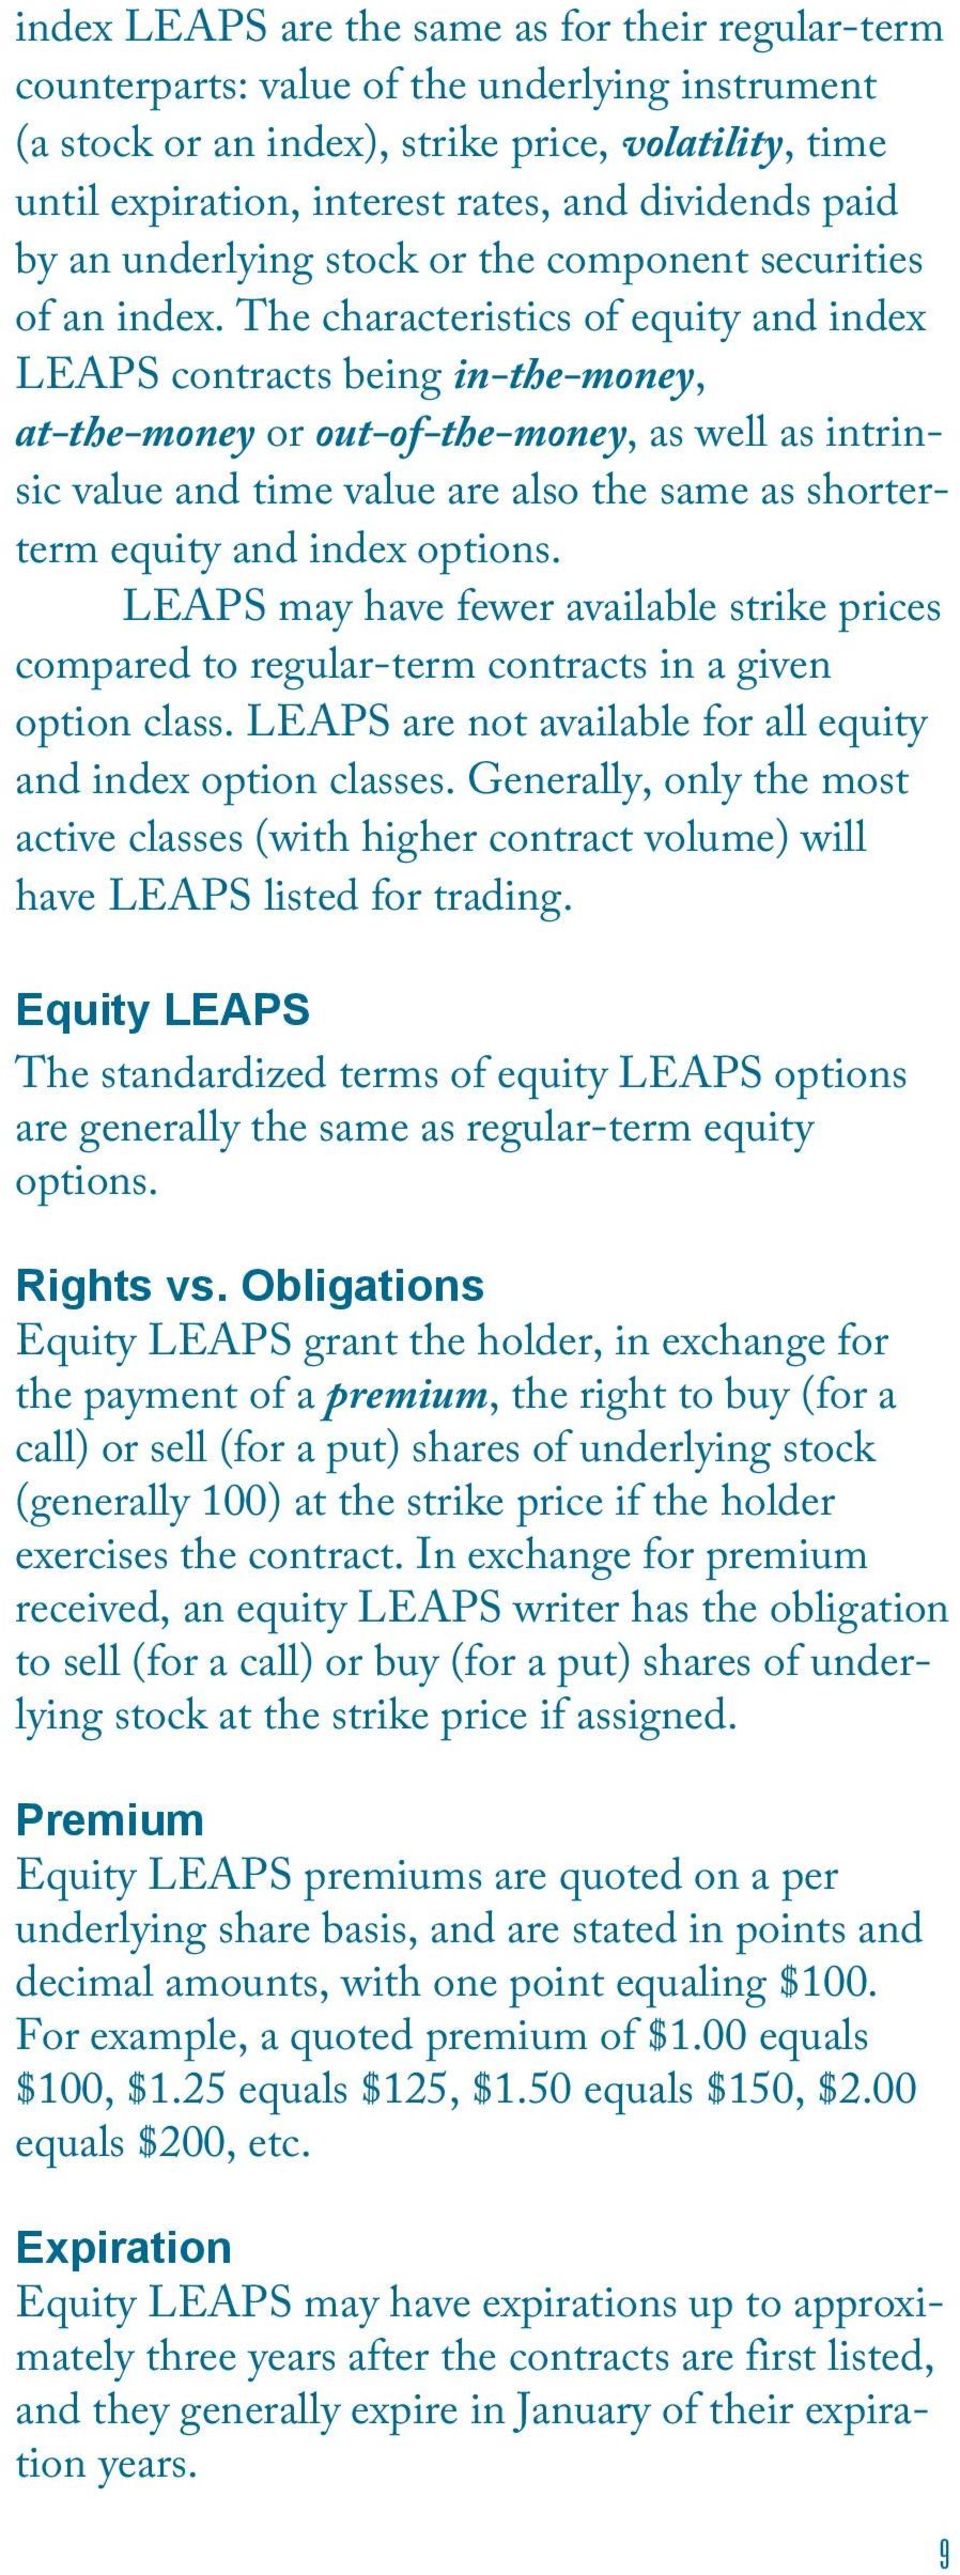 The characteristics of equity and index LEAPS contracts being in-the-money, at-the-money or out-of-the-money, as well as intrinsic value and time value are also the same as shorterterm equity and